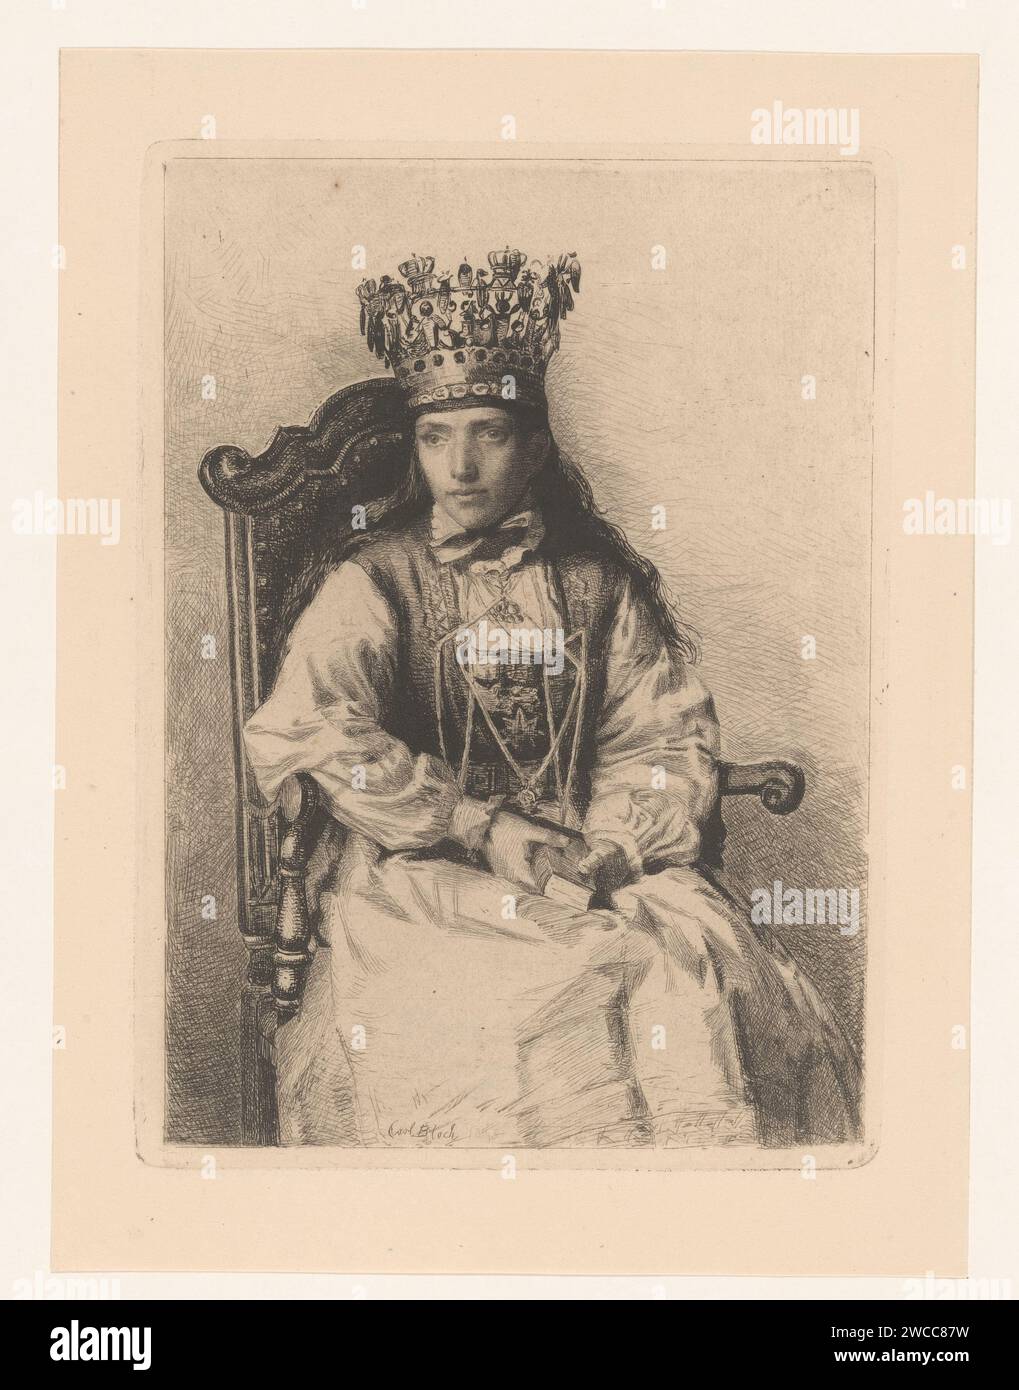 Norwegian bride with wedding crown, Carl Bloch, 1883 print A Norwegian bride. Kneepiece, three of whom were sitting right in an railing chair, a wedding crown on the head and a church book in the hands of the head and face. Scandinavia paper etching / drypoint bride (in wedding-dress). folk costume, regional costume Norway Stock Photo